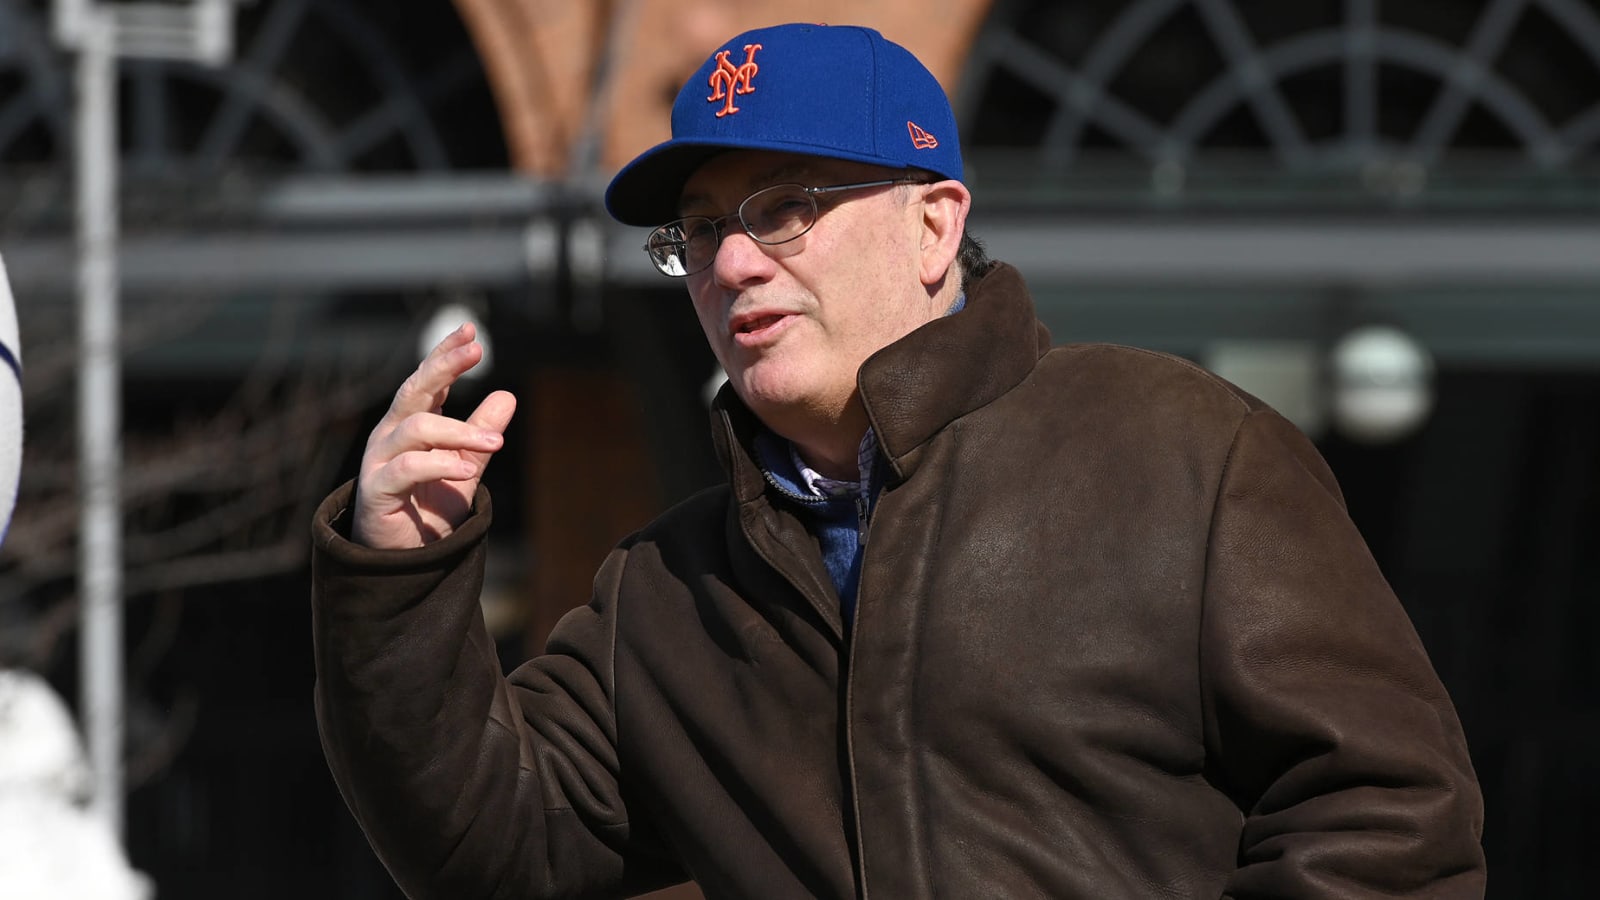 Mets owner runs contest to out source in unflattering story